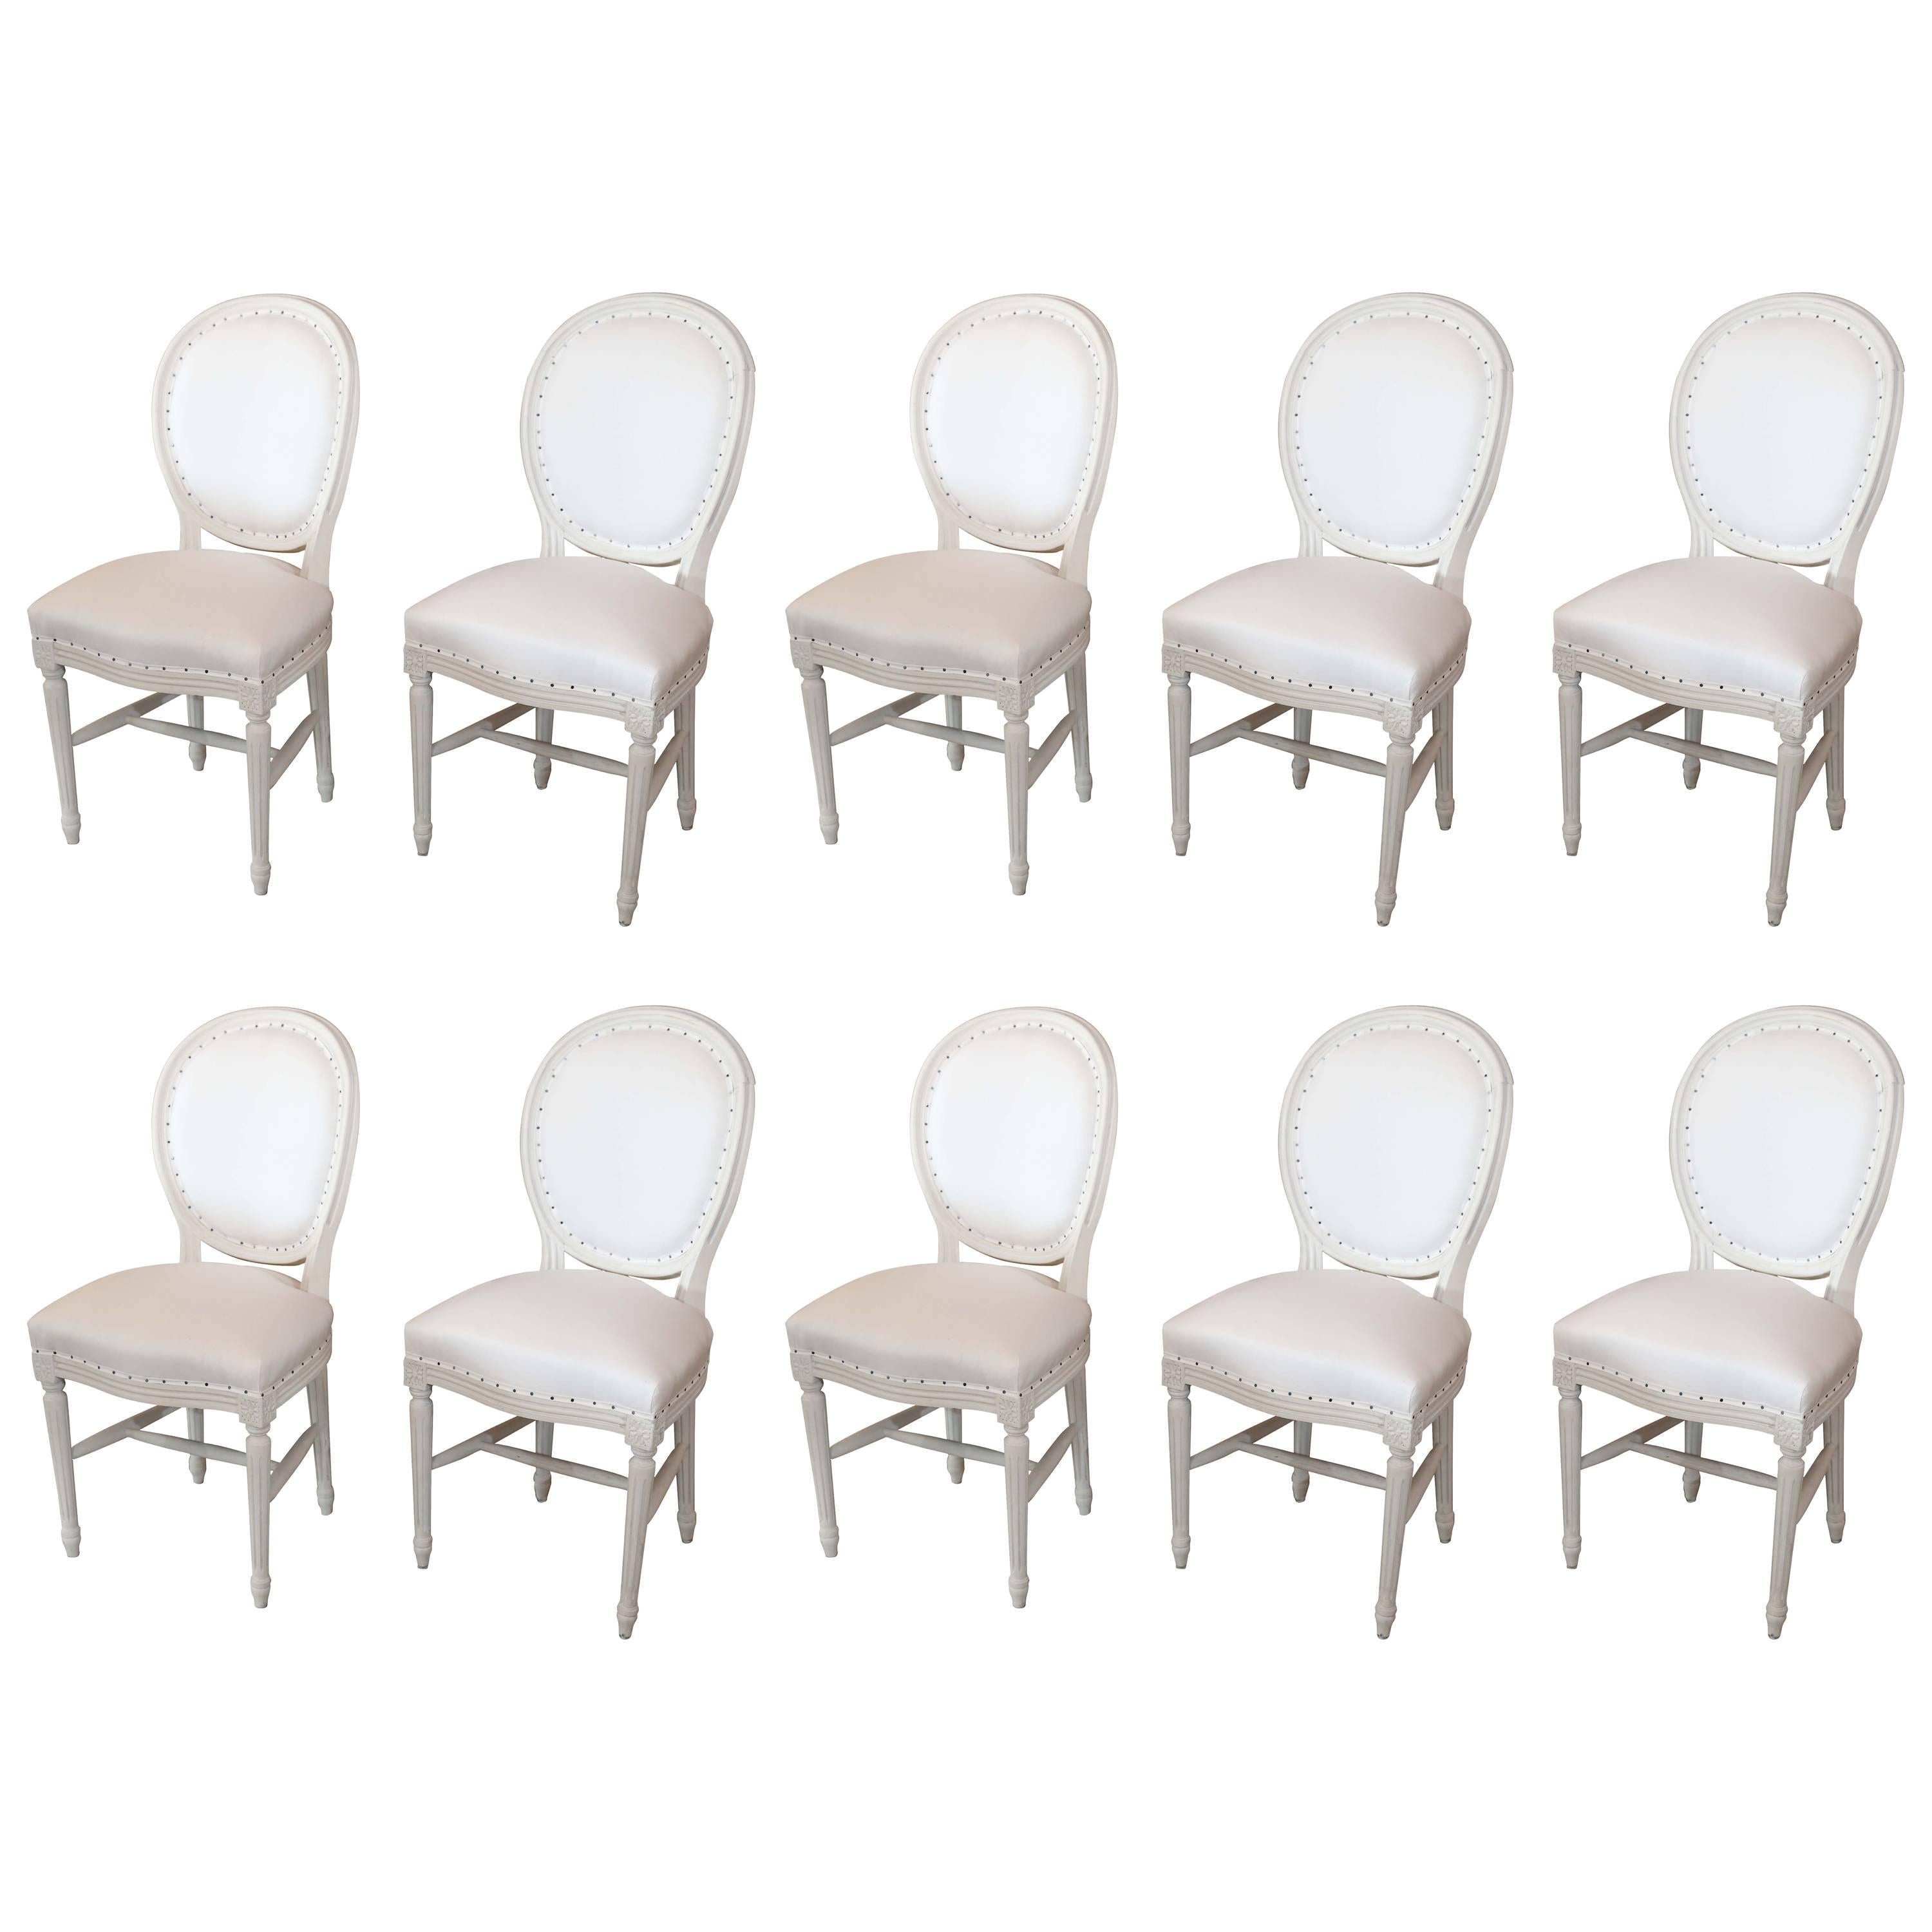 Louis XVI Style Round Back Set of Ten Dining Chairs, circa 1900 from France